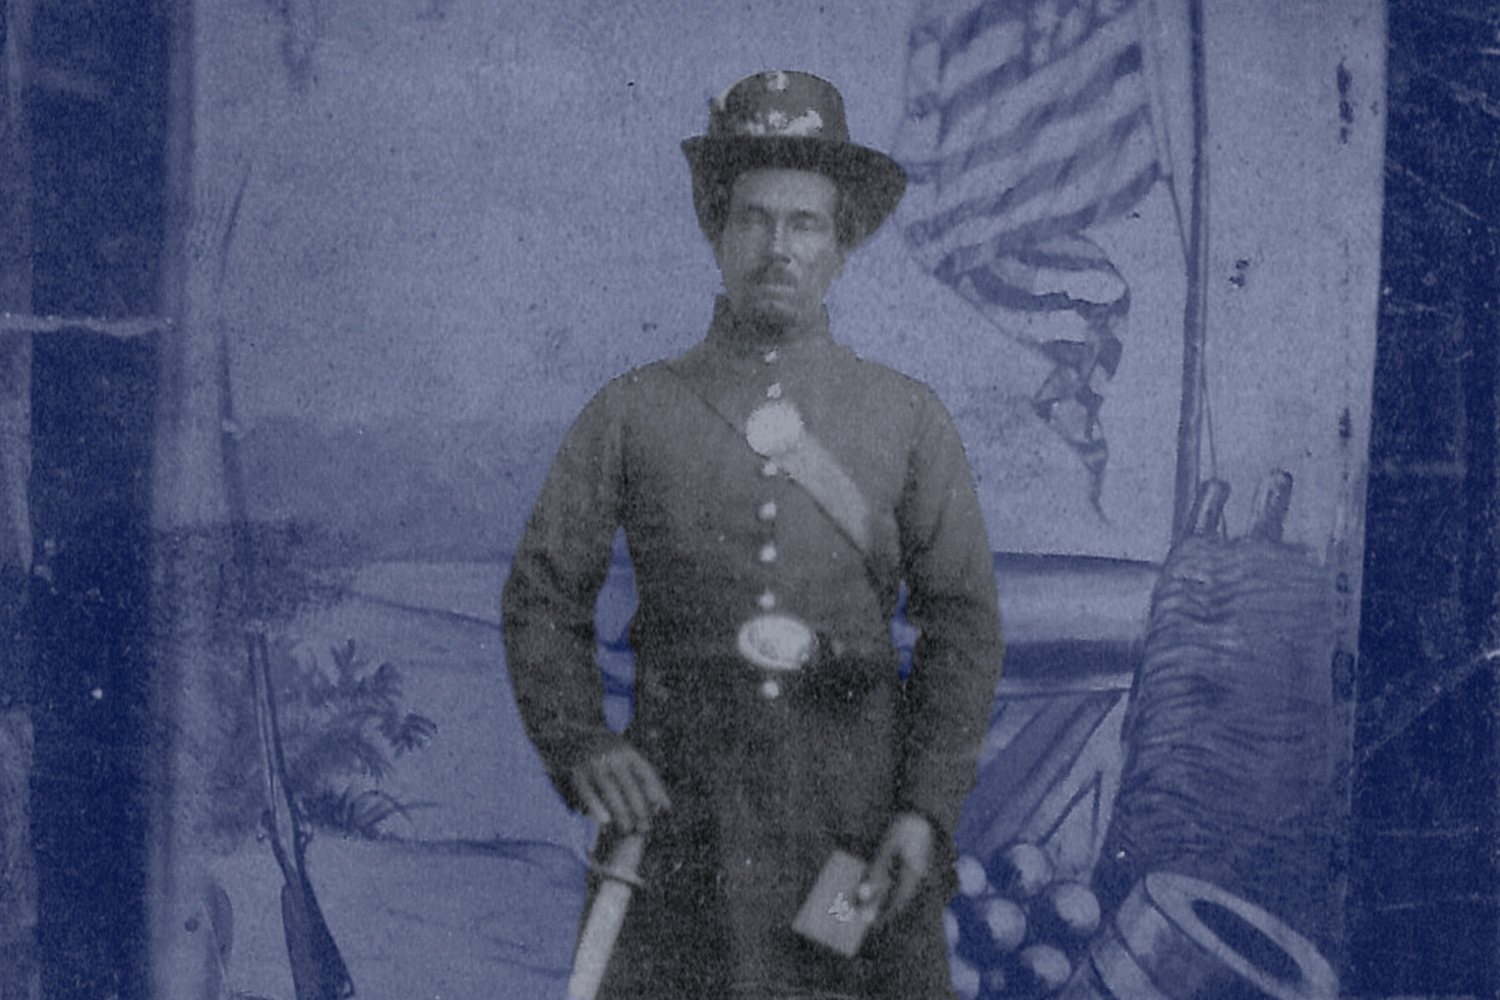 Willis Carter or Calhoun, 42, enlisted at the Benton Barracks in Missouri and was a cook in the regional field hospital.